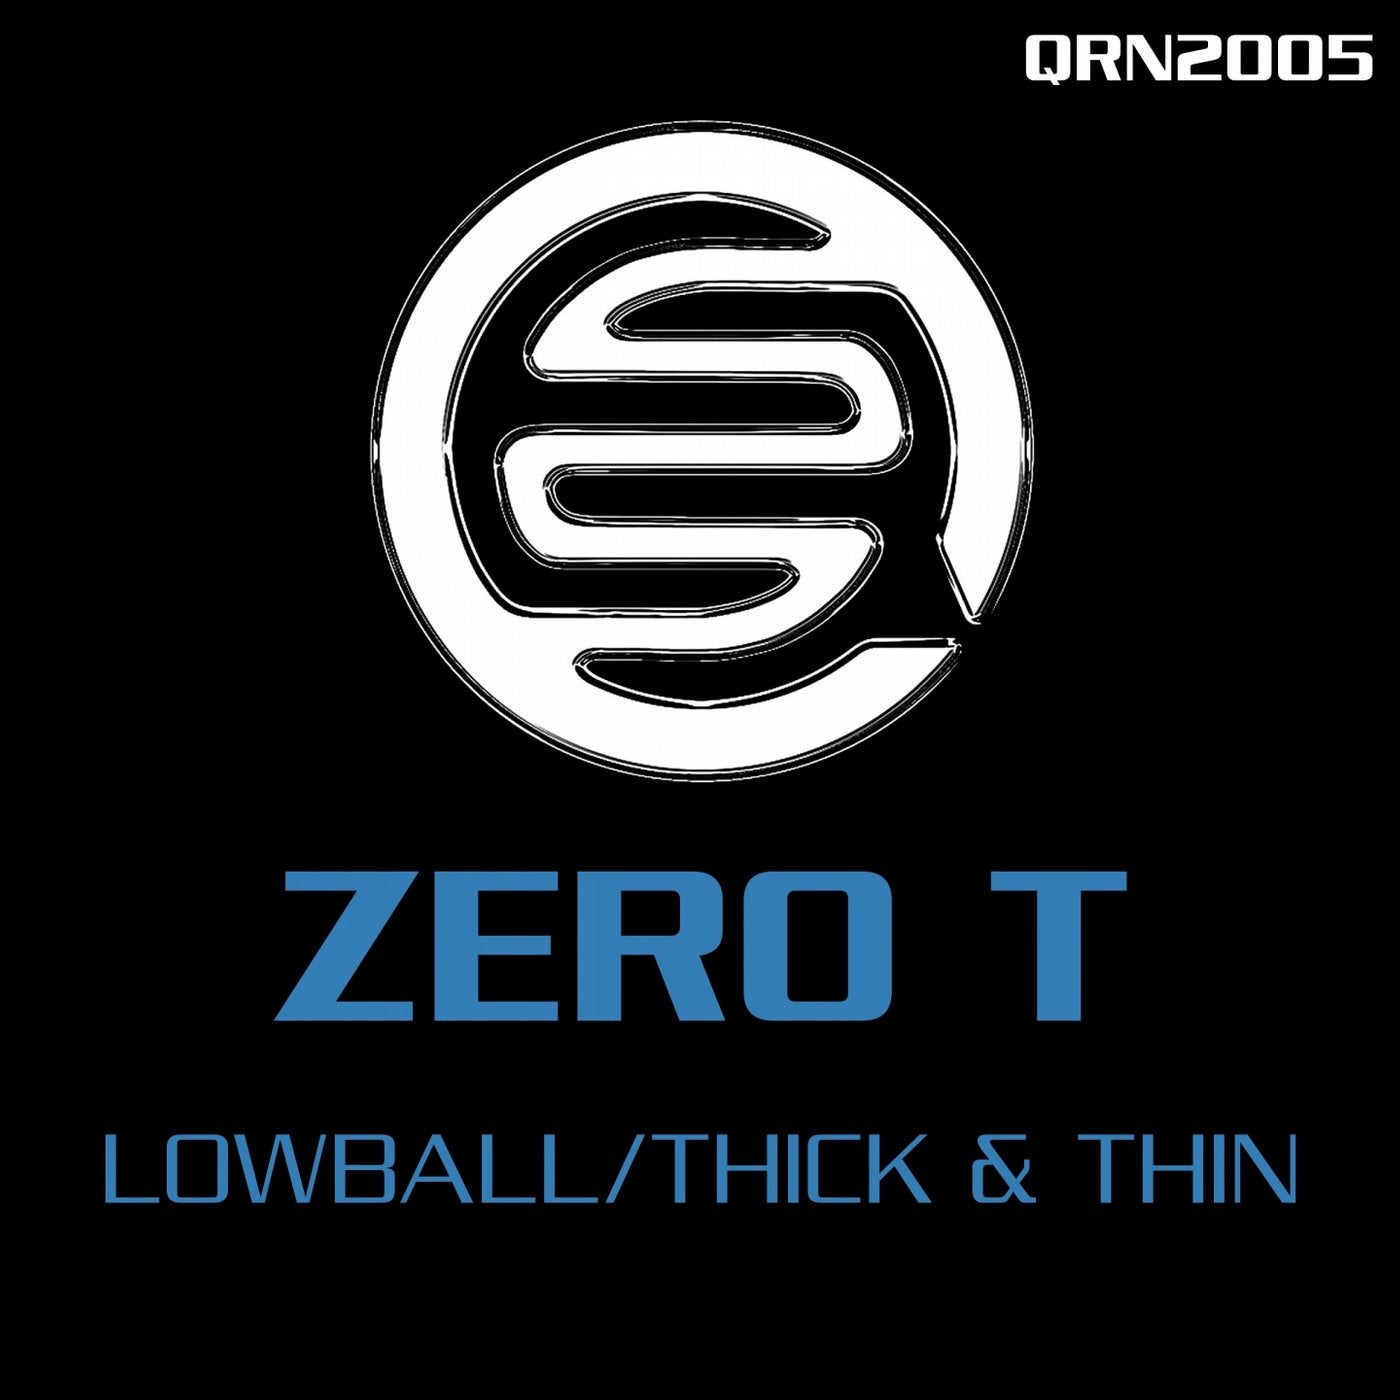 Lowball / Thick & Thin